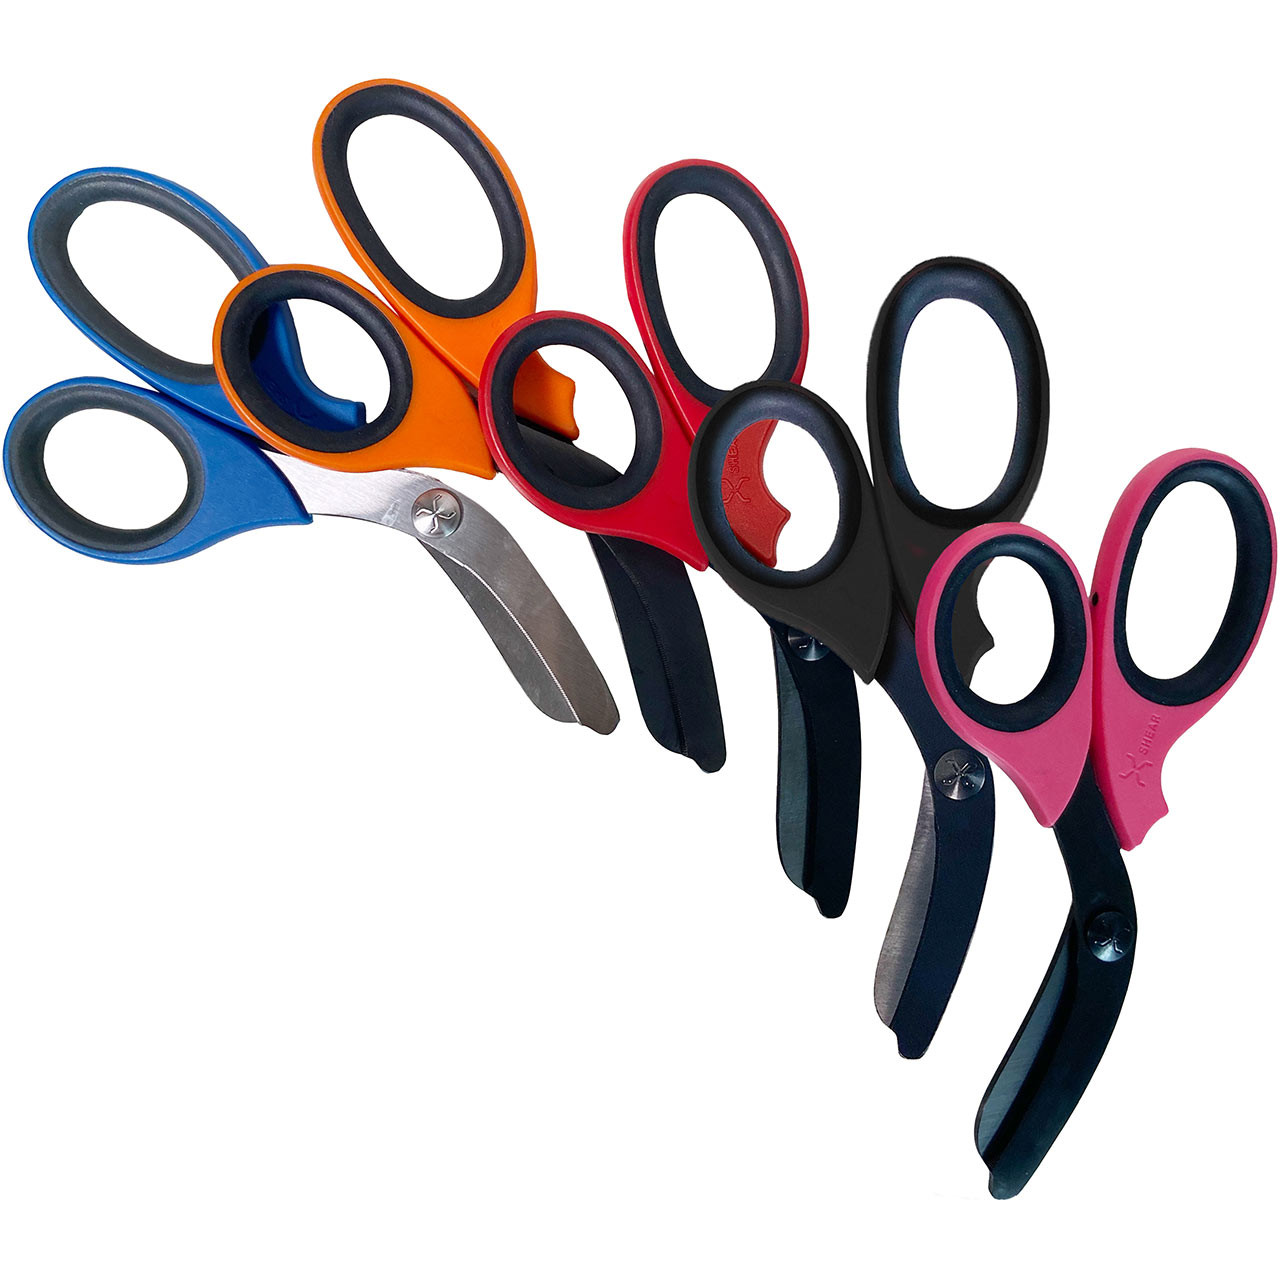 https://cdn11.bigcommerce.com/s-rd4j7/images/stencil/1280x1280/products/2091/12935/x-shears-all-colors-overlapped-xshears__21478.1610385815.jpg?c=2